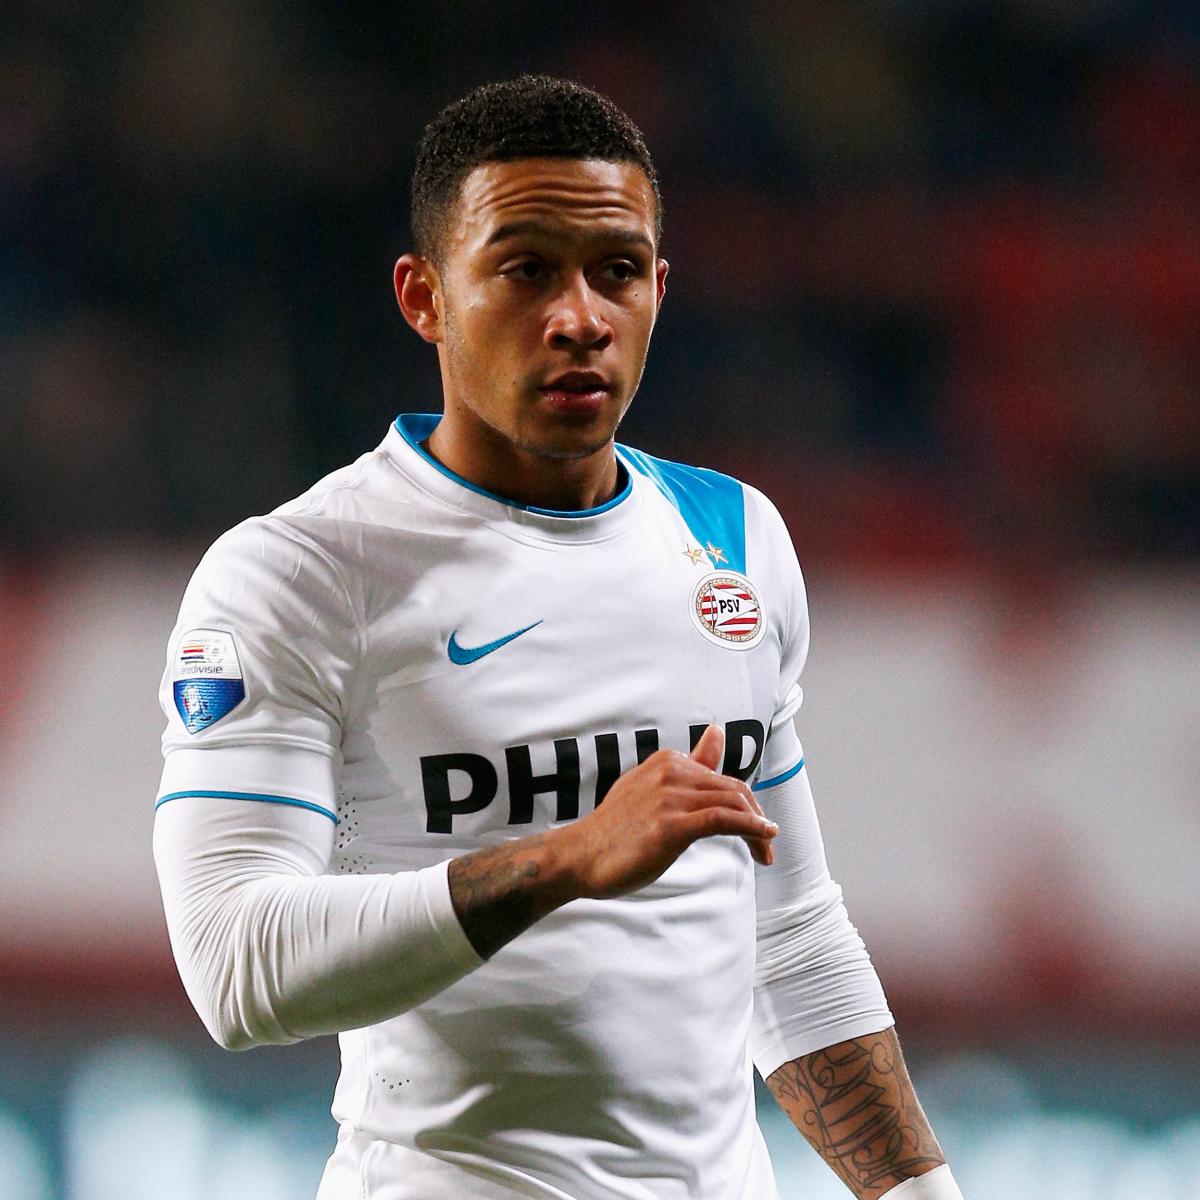 Memphis Depay is Manchester United's new showman, shining in the Champions  League after troubled upbringing